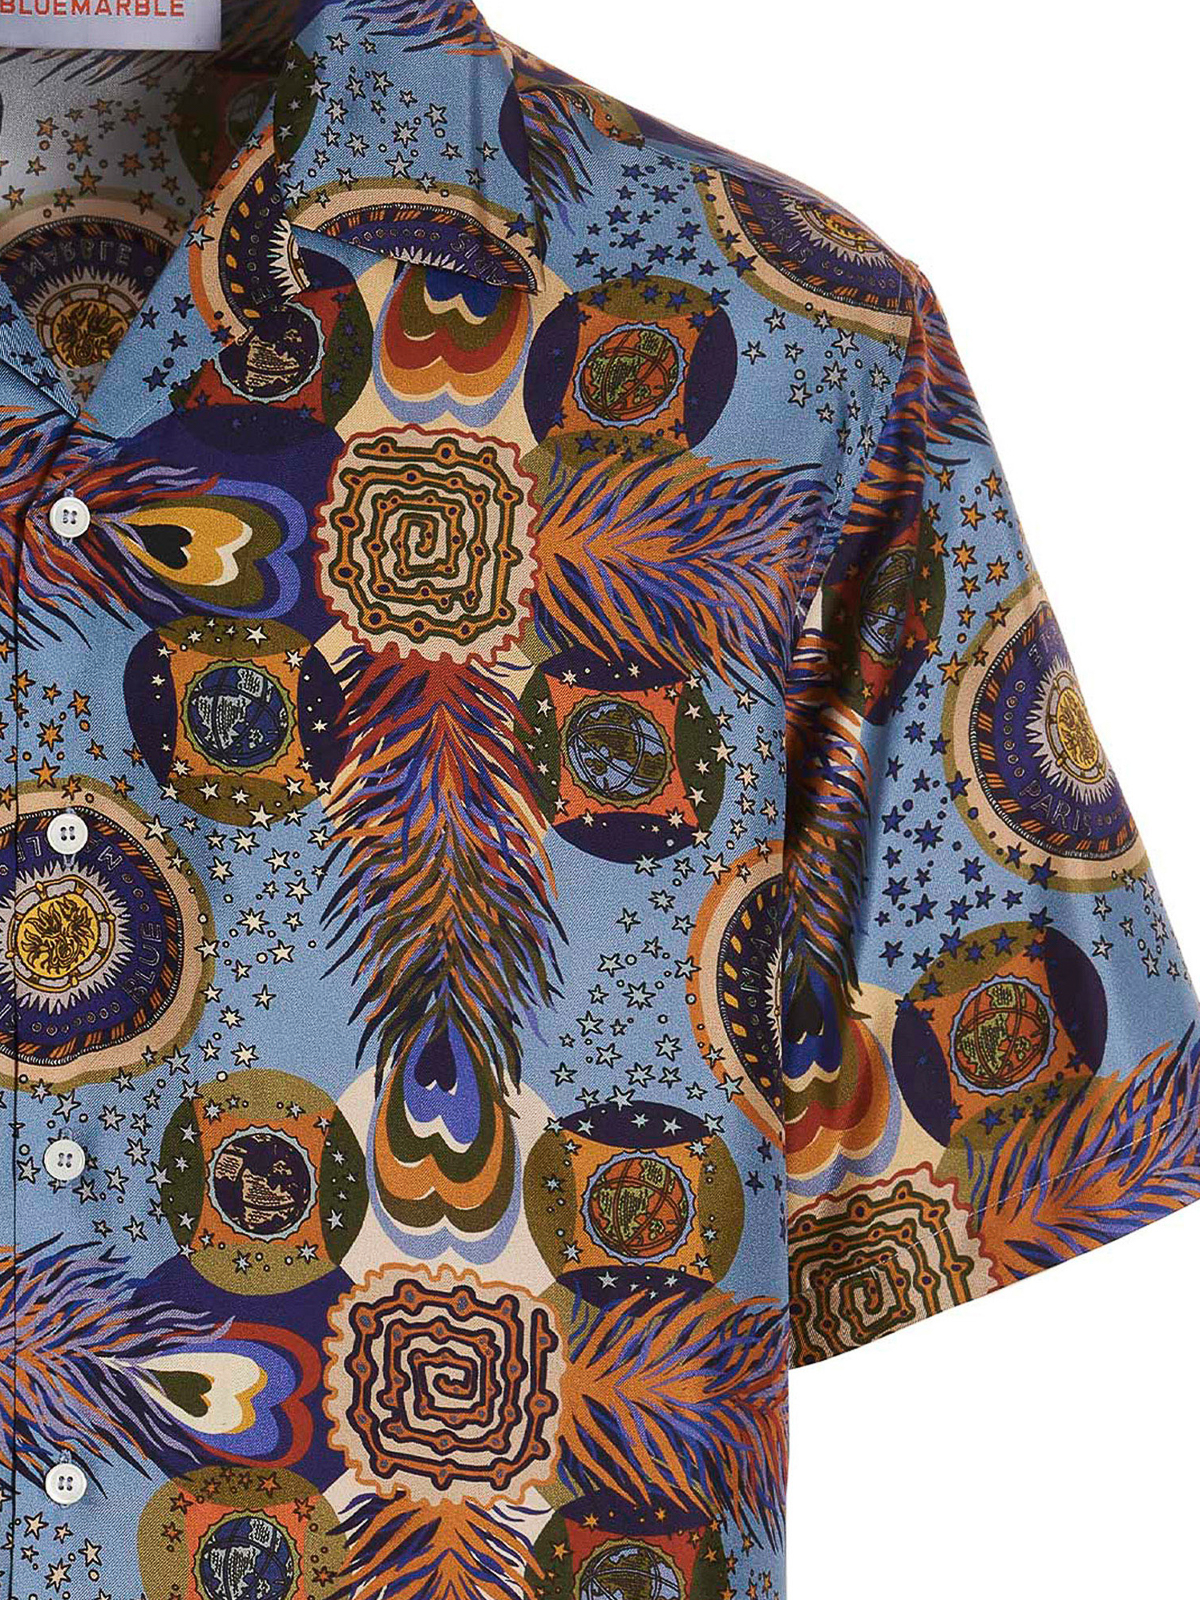 Shop Bluemarble All-over Print Shirt In Multicolour